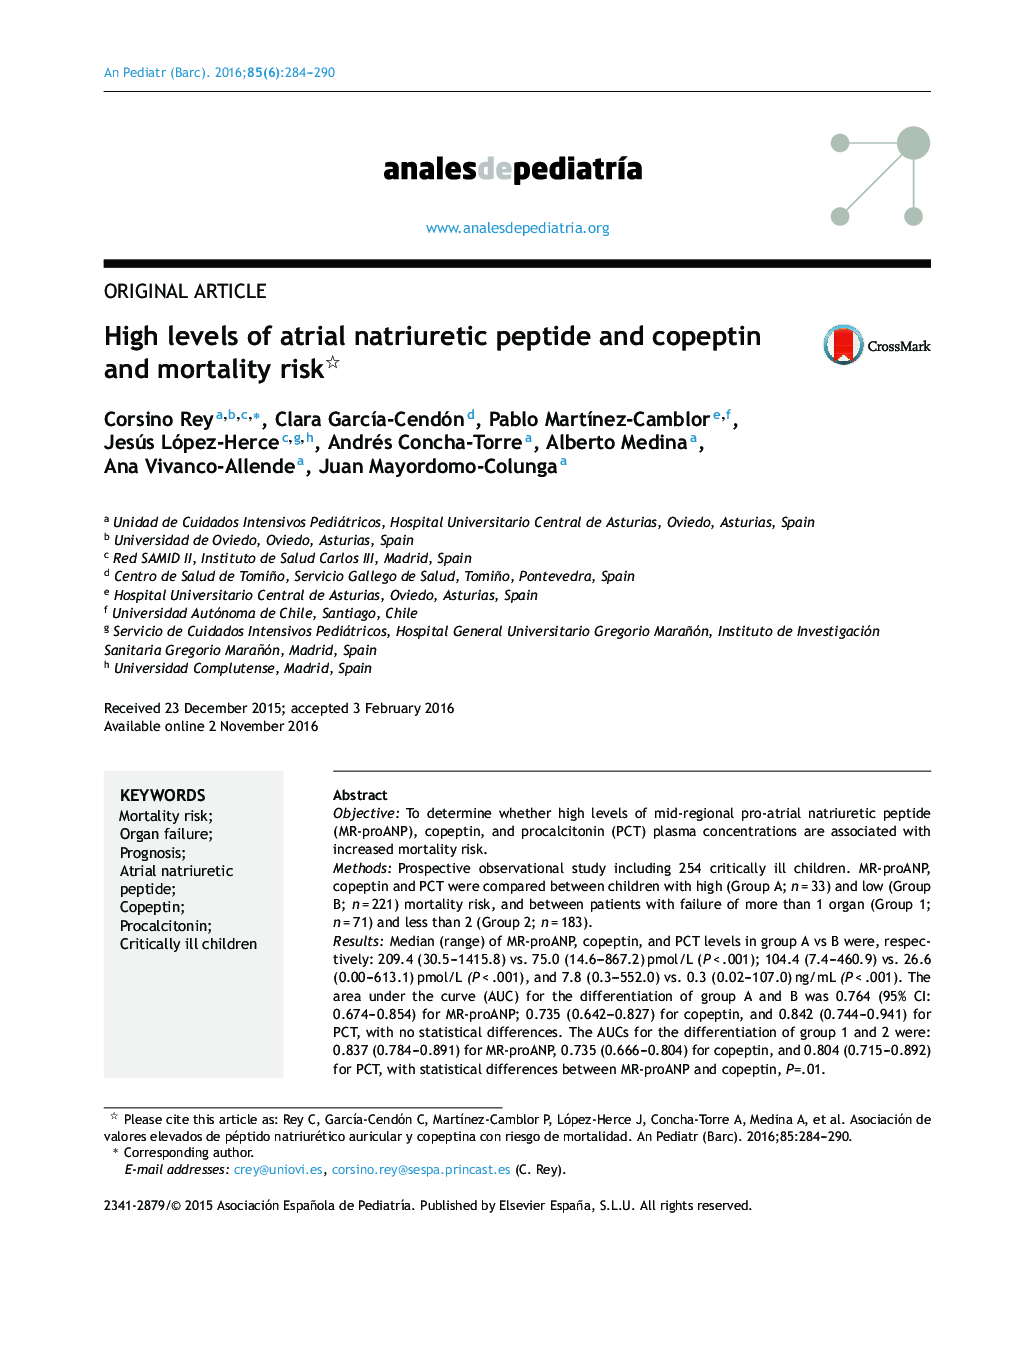 High levels of atrial natriuretic peptide and copeptin and mortality risk